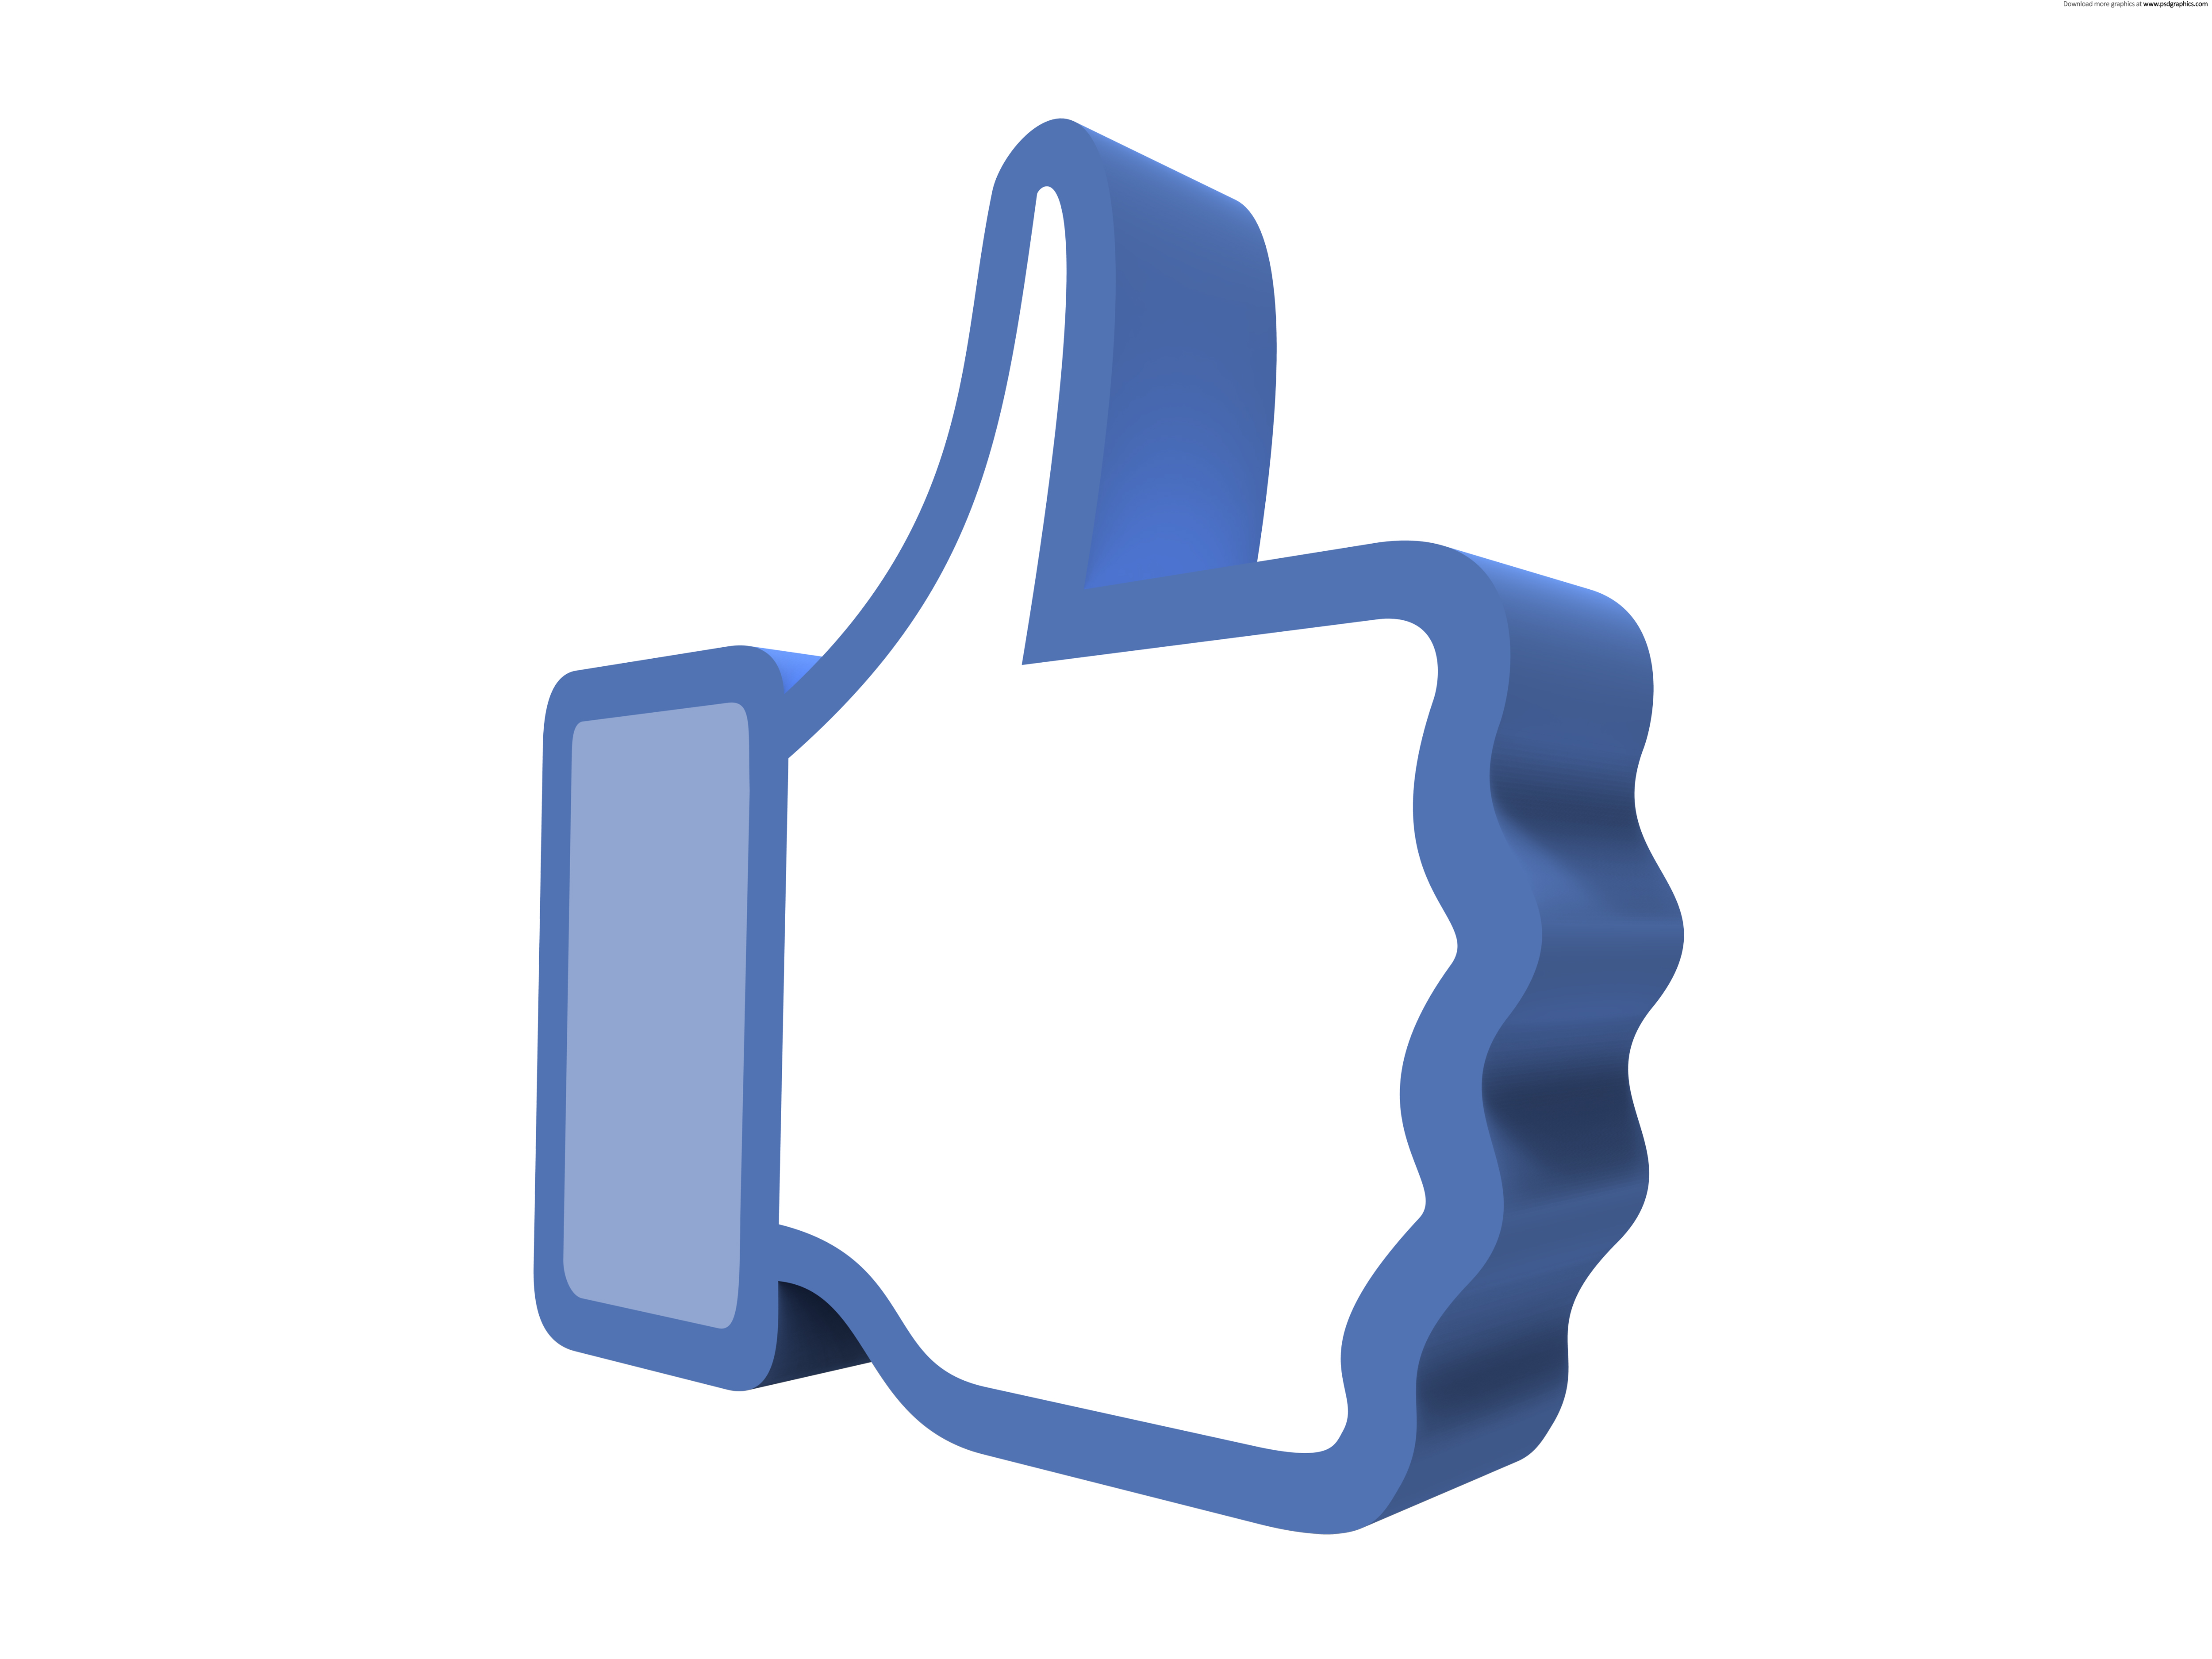 3D Like And Dislike Buttons – Free PSD | YourSourceIsOpen.